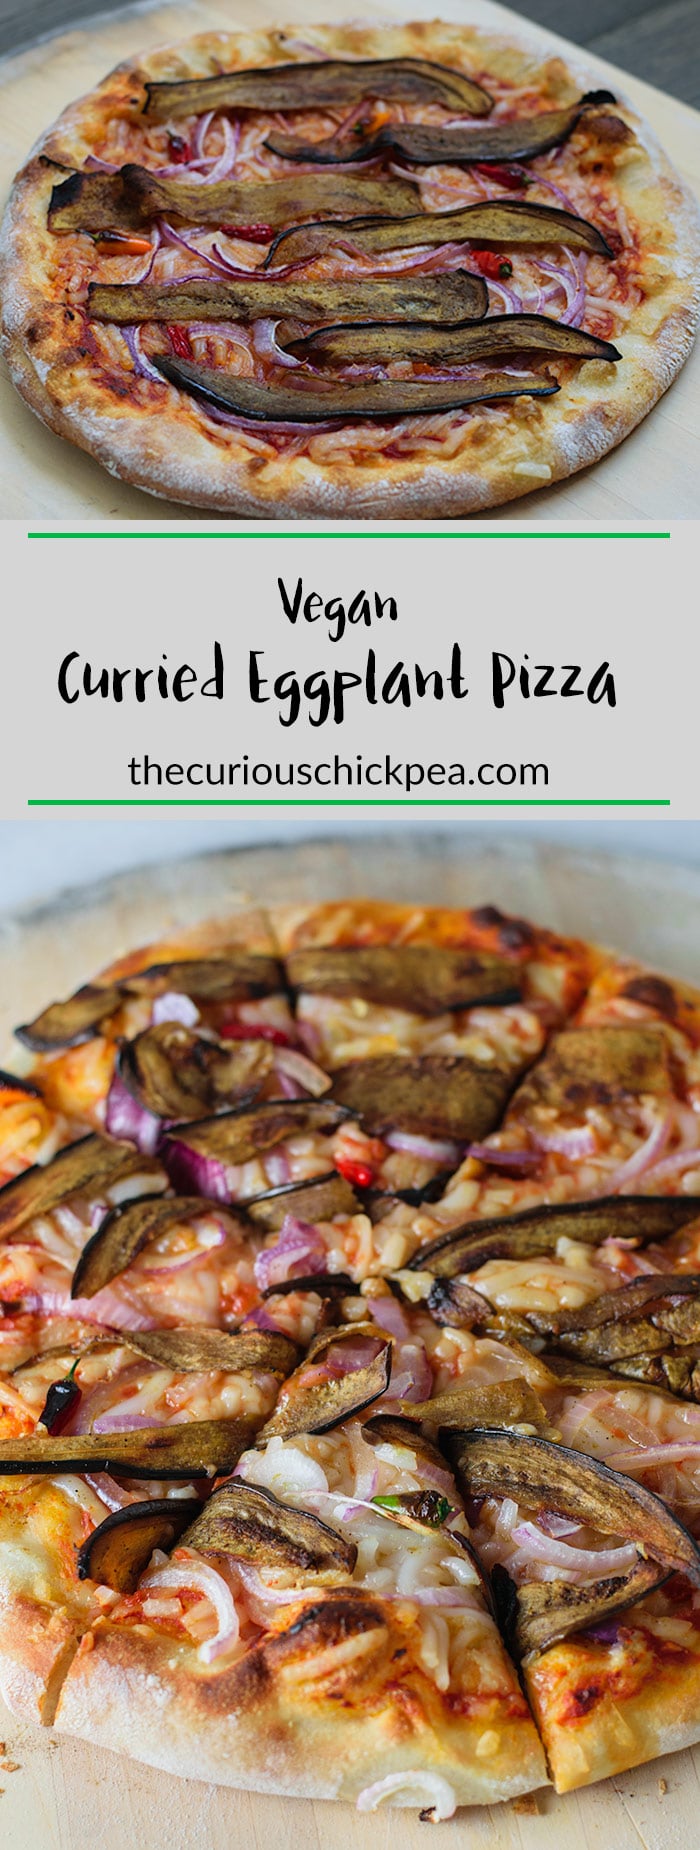 Vegan Curried Eggplant Pizza | This cheesy pizza is topped with sweet red onions, spicy hot chile peppers, and delicious crispy slices of curry marinated eggplant. | thecuriouschickpea.com #vegan #veganpizza #pizza #curry